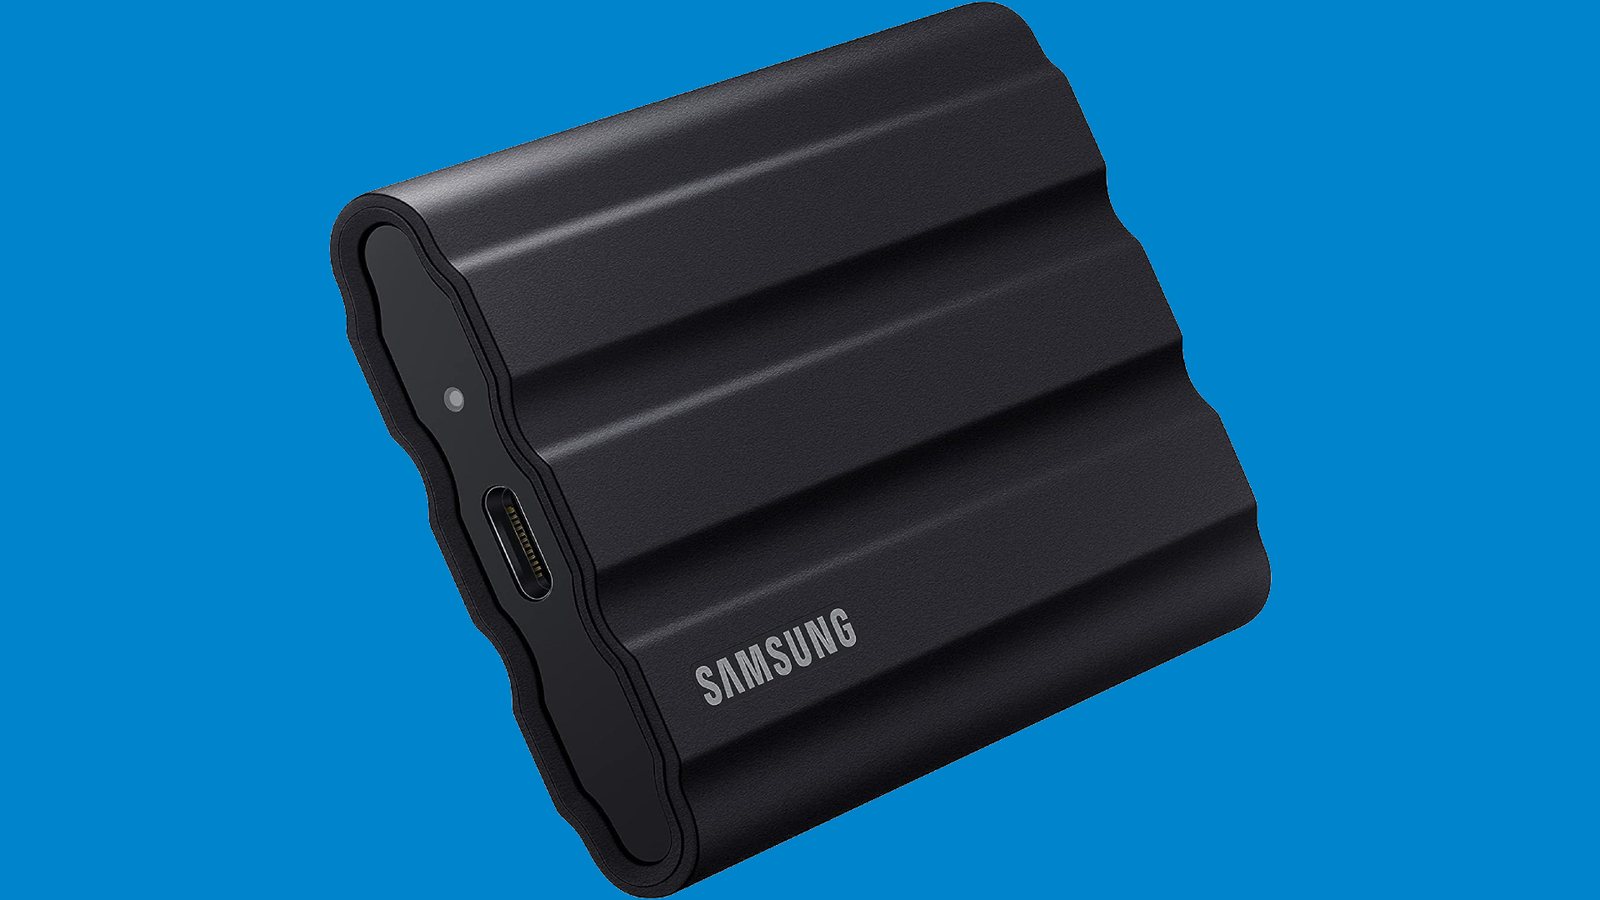 Samsung T7 review: The portable SSD to get right now